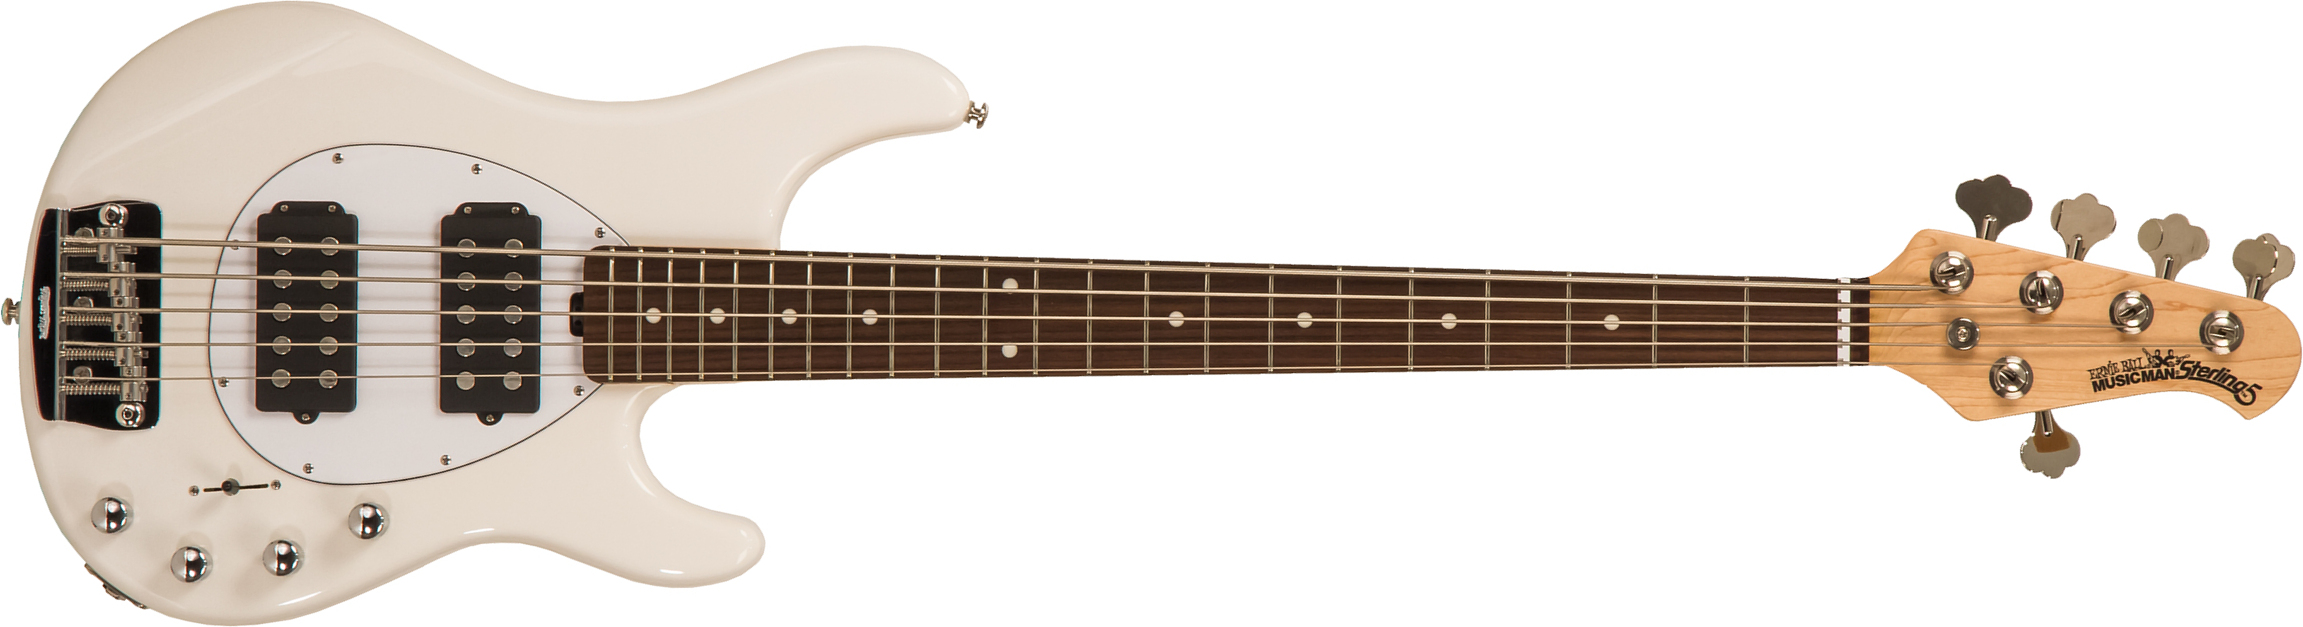 Music Man Sterling 5 2h 5c Active Rw - White - Solidbody E-bass - Main picture